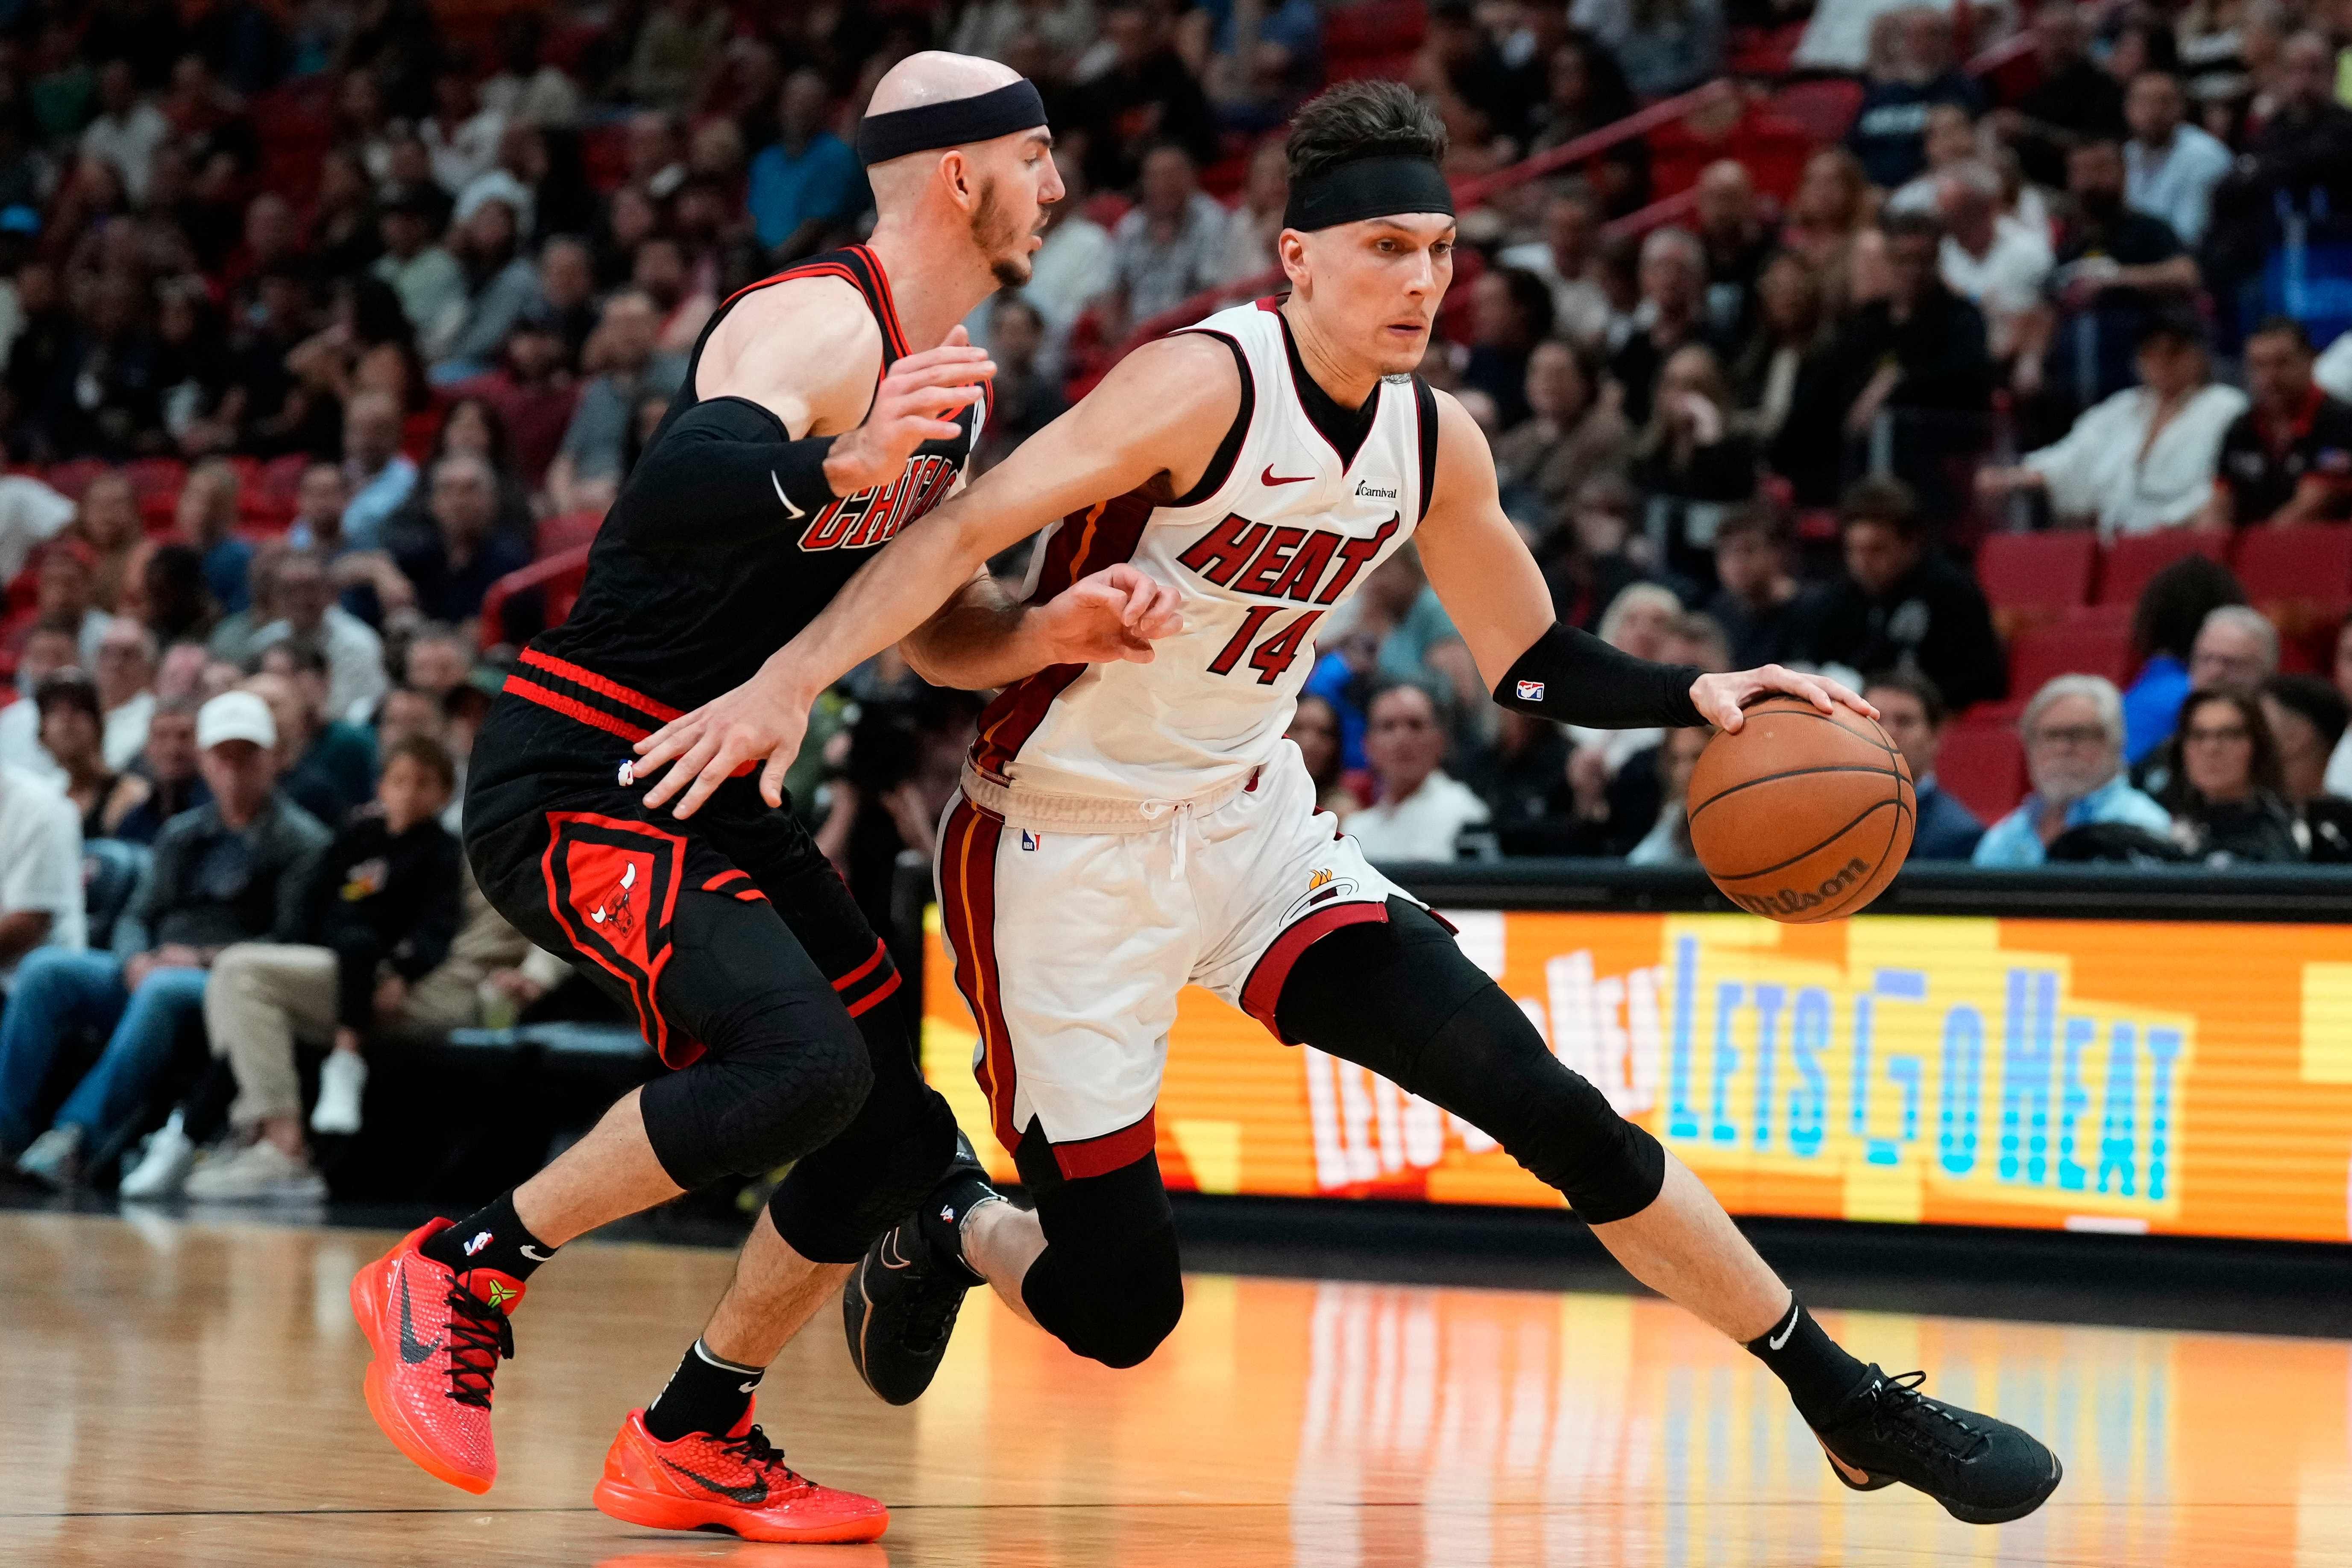 Miami Heat and New Orleans Pelicans overcome key absences to take final play-off spots